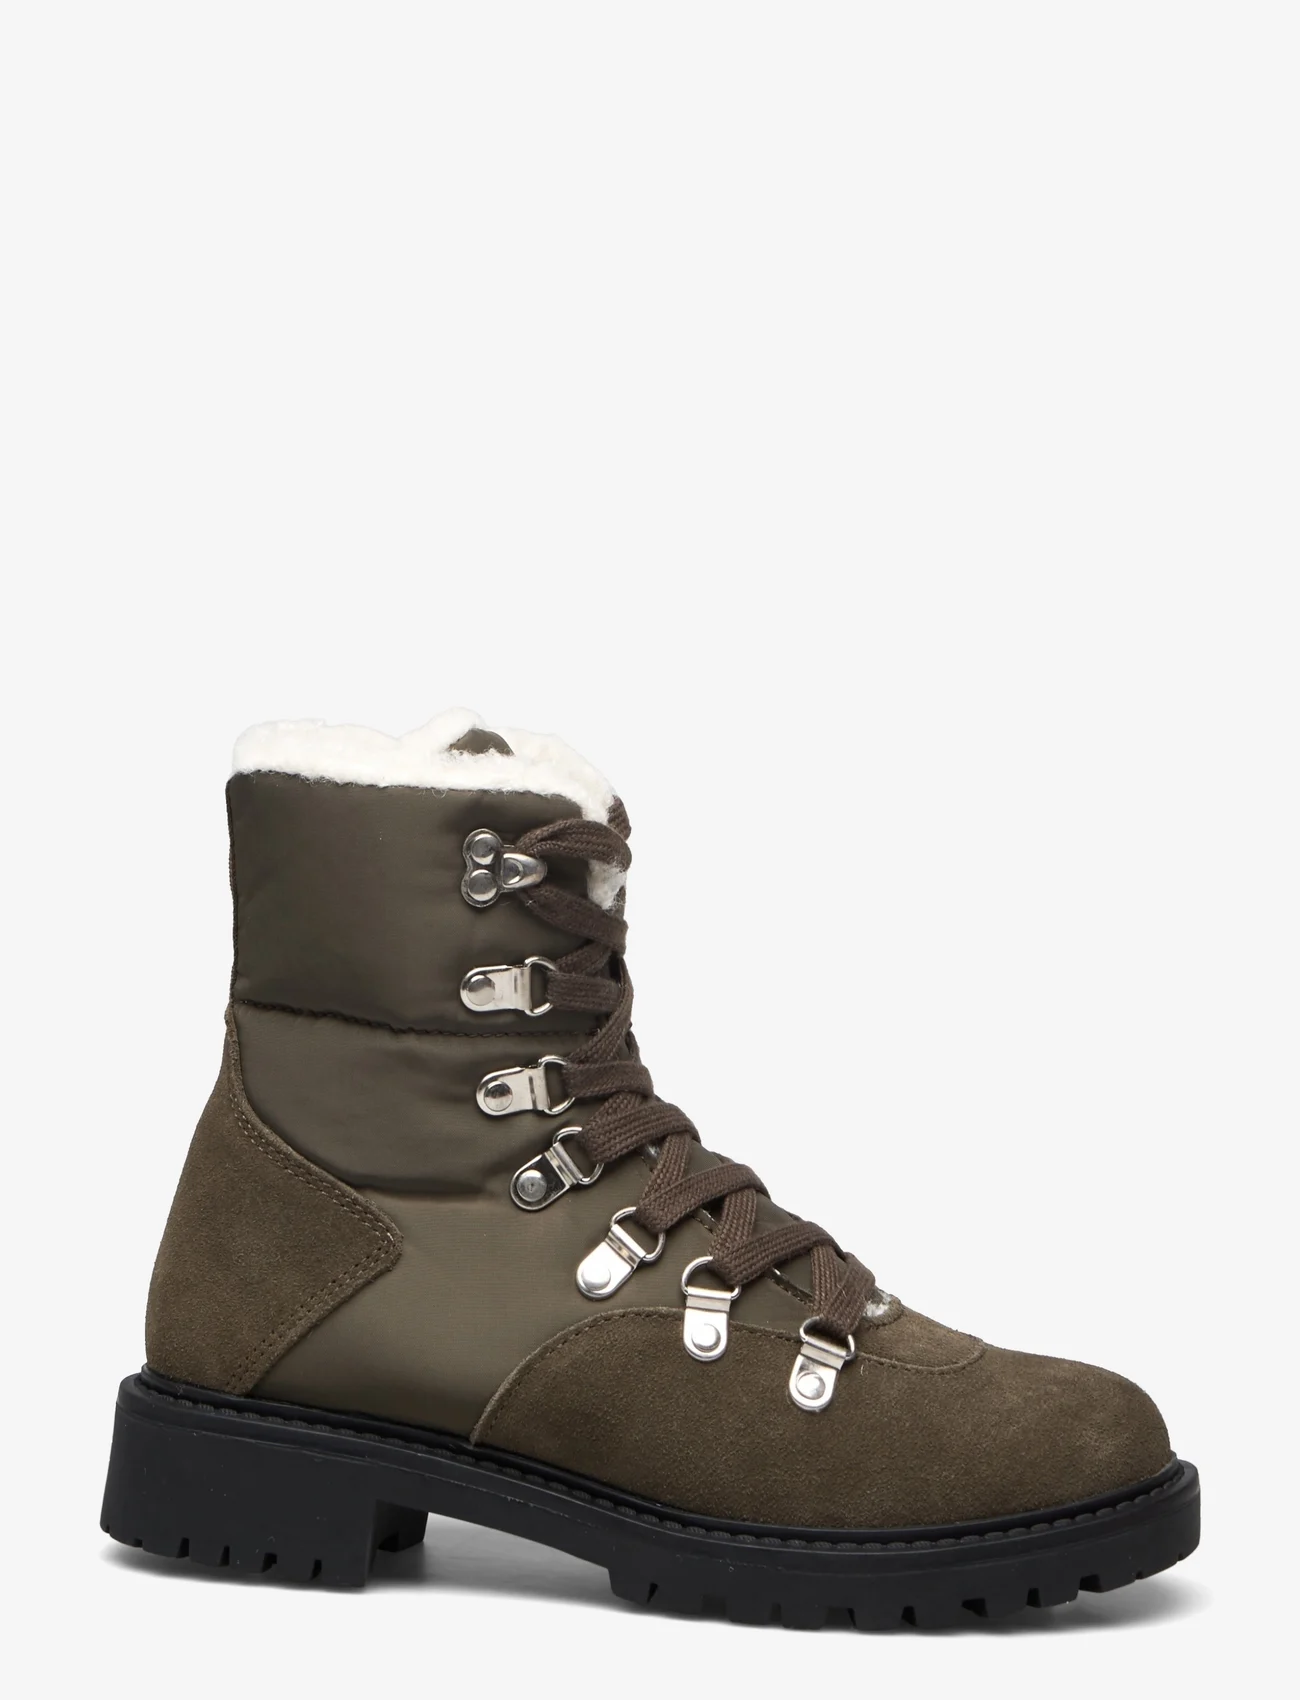 Sofie Schnoor Baby and Kids - Boot - børn - army green - 1